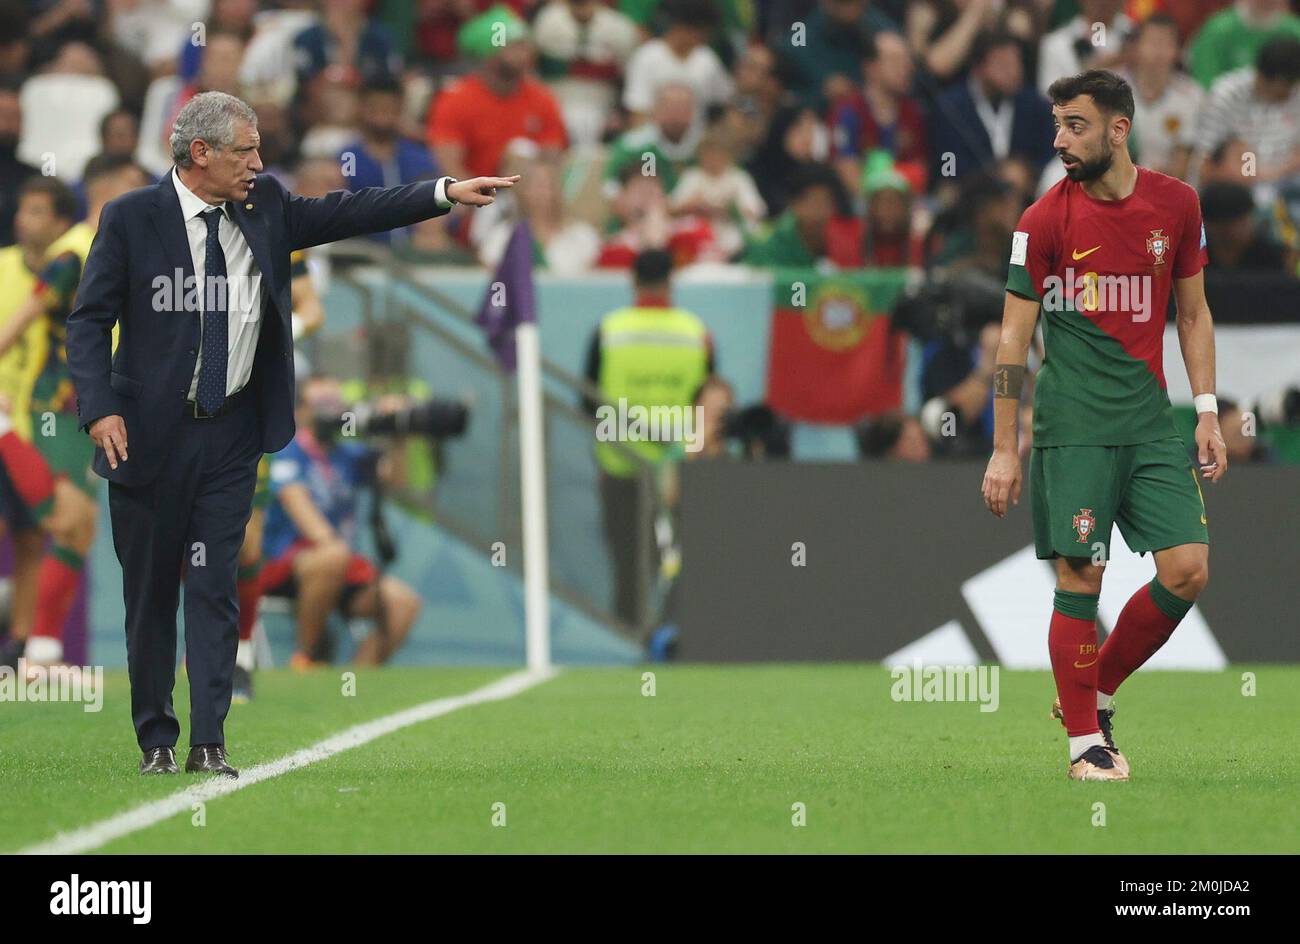 Lusail, Qatar. 6th Dec, 2022. Fernando Santos (L), head coach of Portugal, gestures during the Round of 16 match between Portugal and Switzerland of the 2022 FIFA World Cup at Lusail Stadium in Lusail, Qatar, Dec. 6, 2022. Credit: Pan Yulong/Xinhua/Alamy Live News Stock Photo